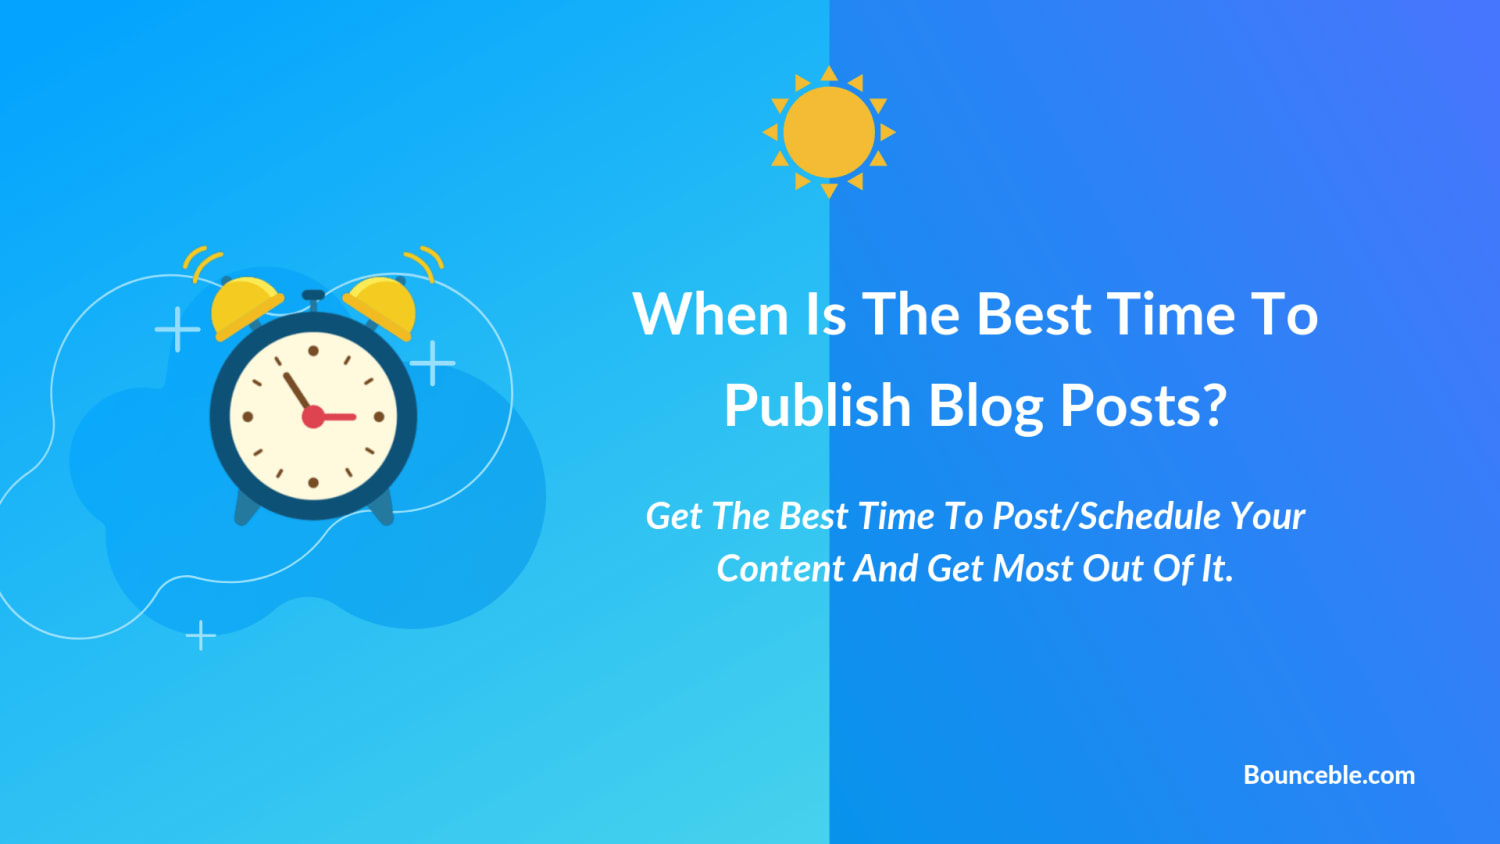 When Is The Best Time To Publish Blog Posts And Get Traffic?